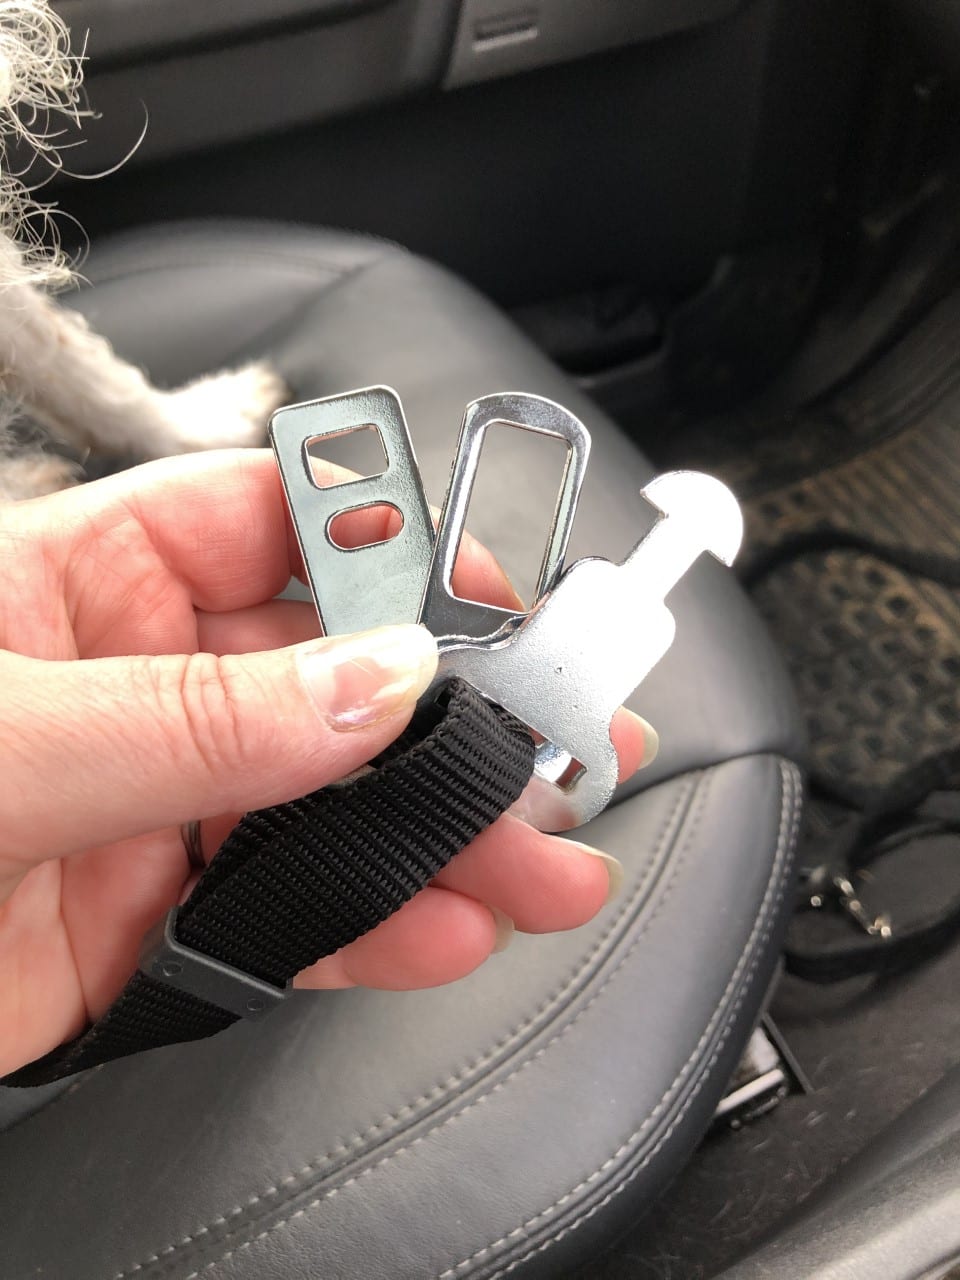 Car seat belt harness for Romanian rescue dog | 1 Dog At a Time Rescue UK |